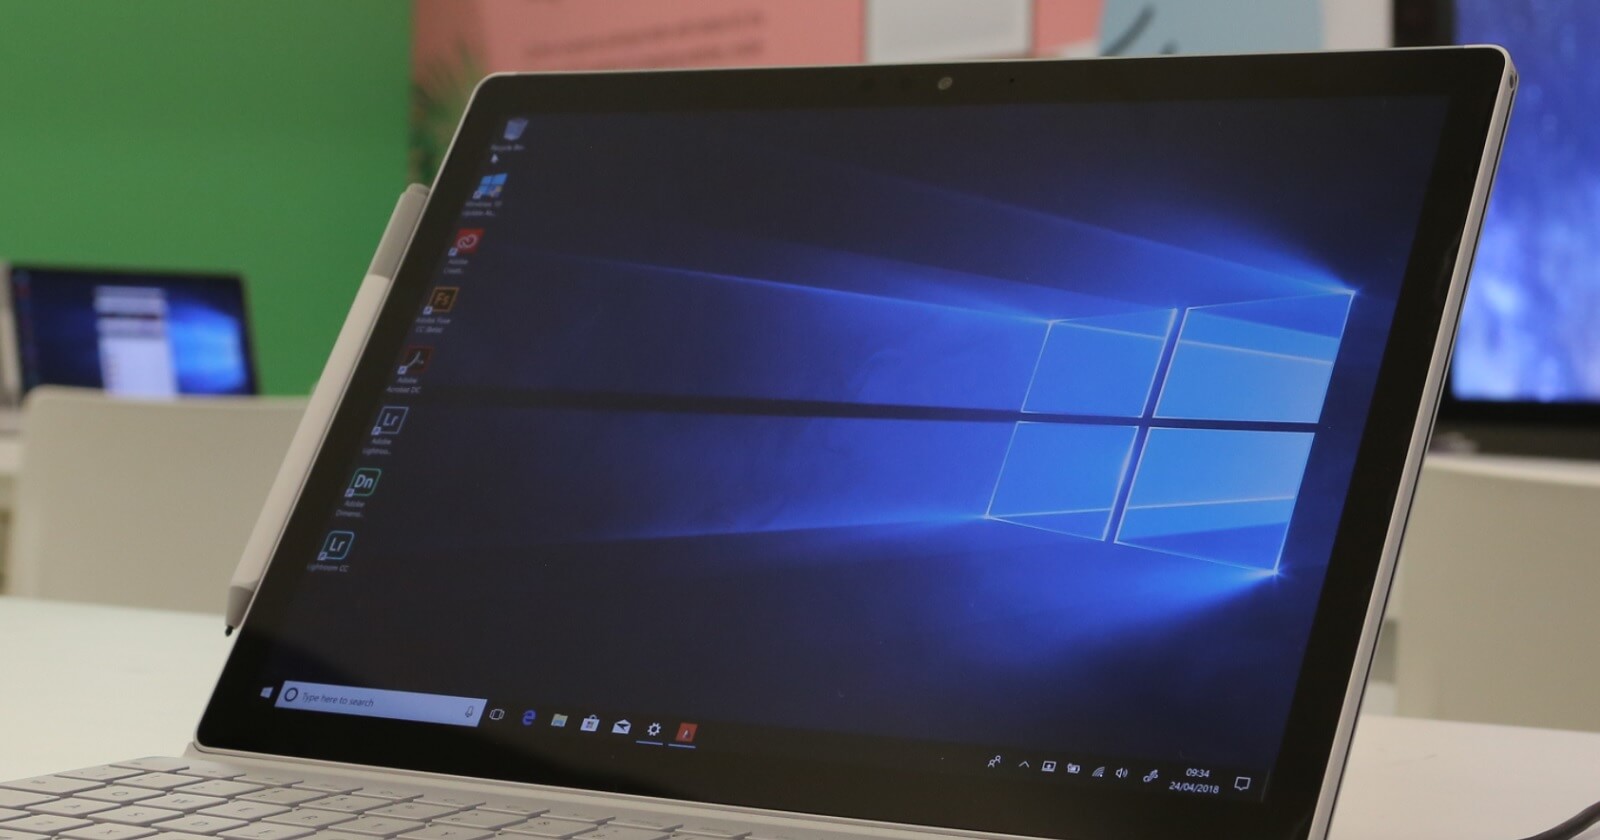 Windows 10 Slow After an Update? Here's How to Fix It.